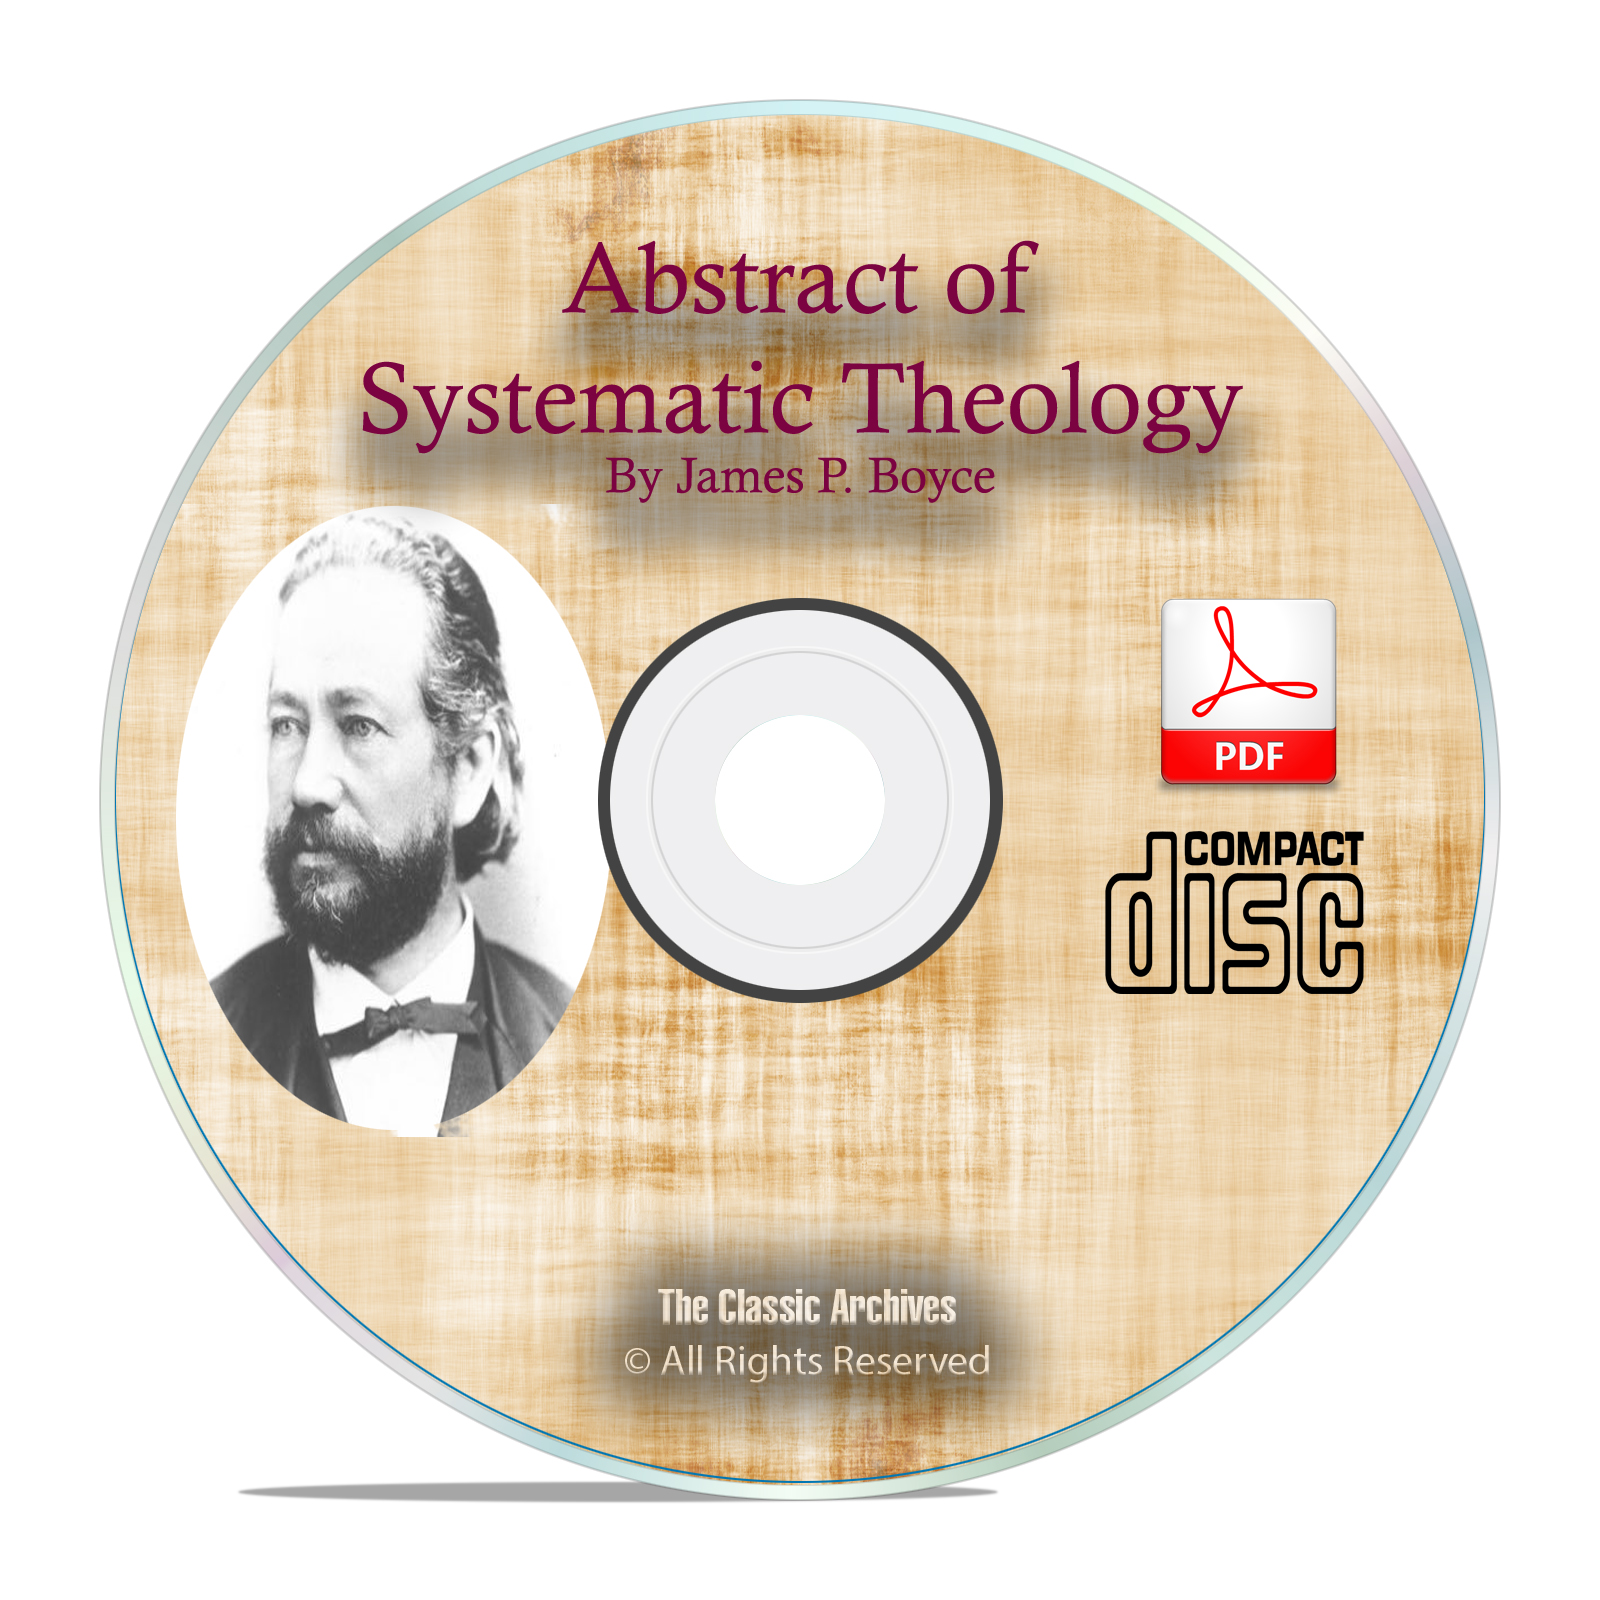 Abstract Systematic Theology, James Boyce, Bible Commentary Study PDF CD